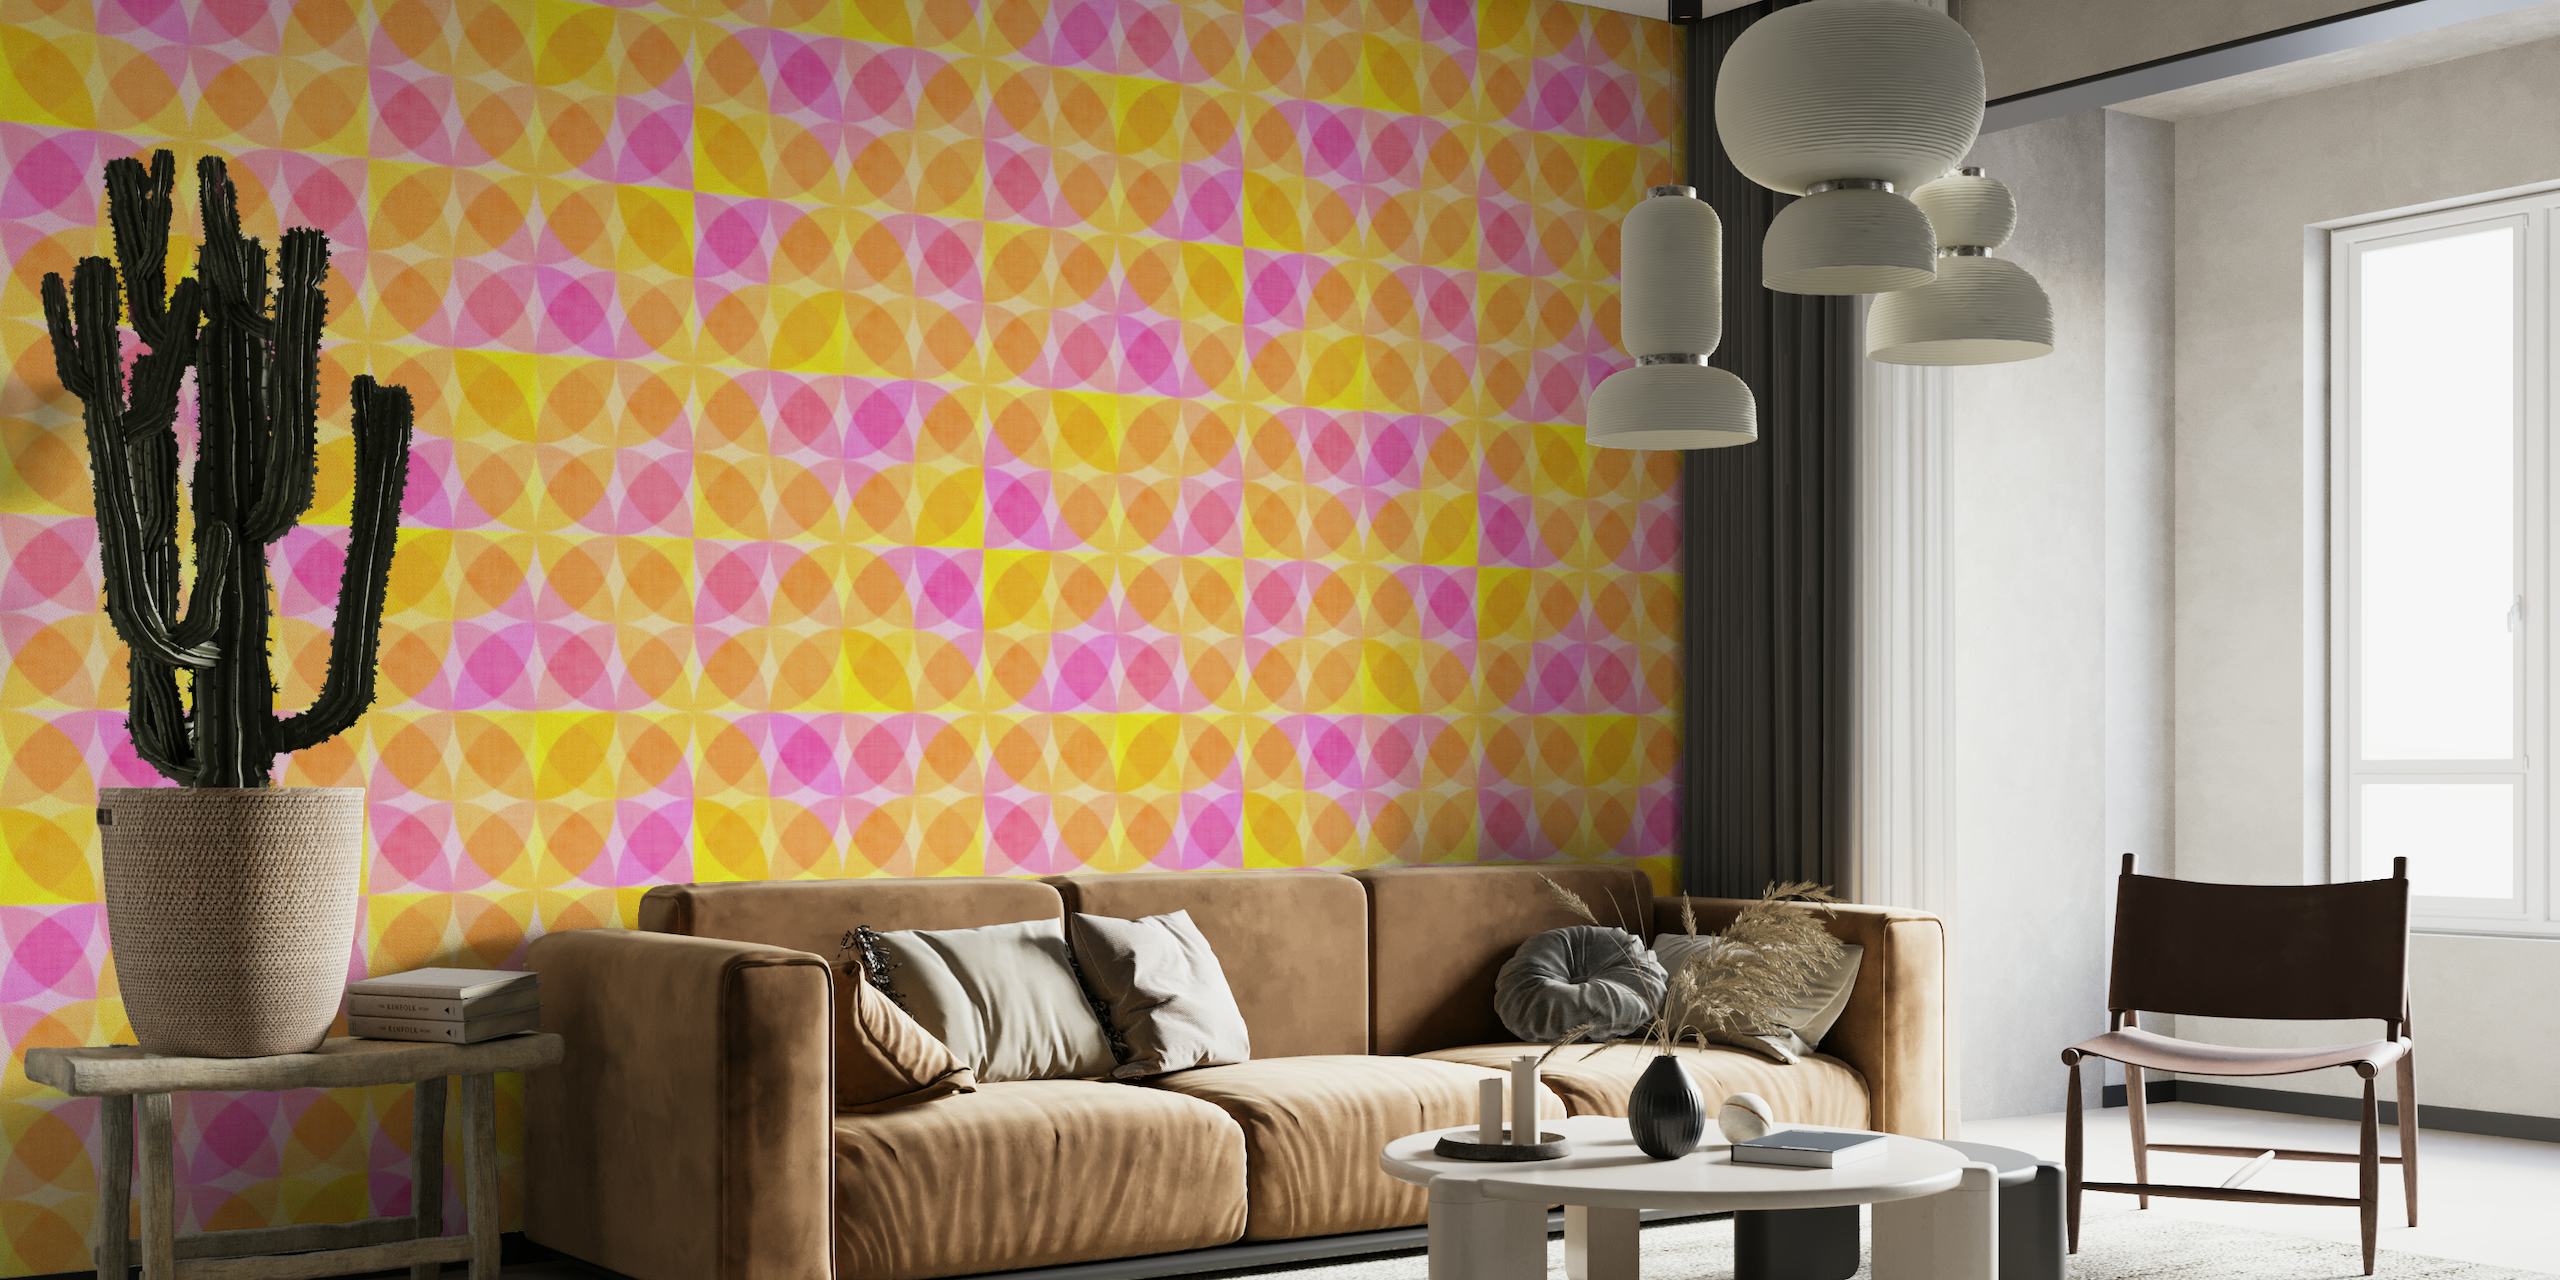 Party Geometric Shapes Pink Orange and Yellow behang